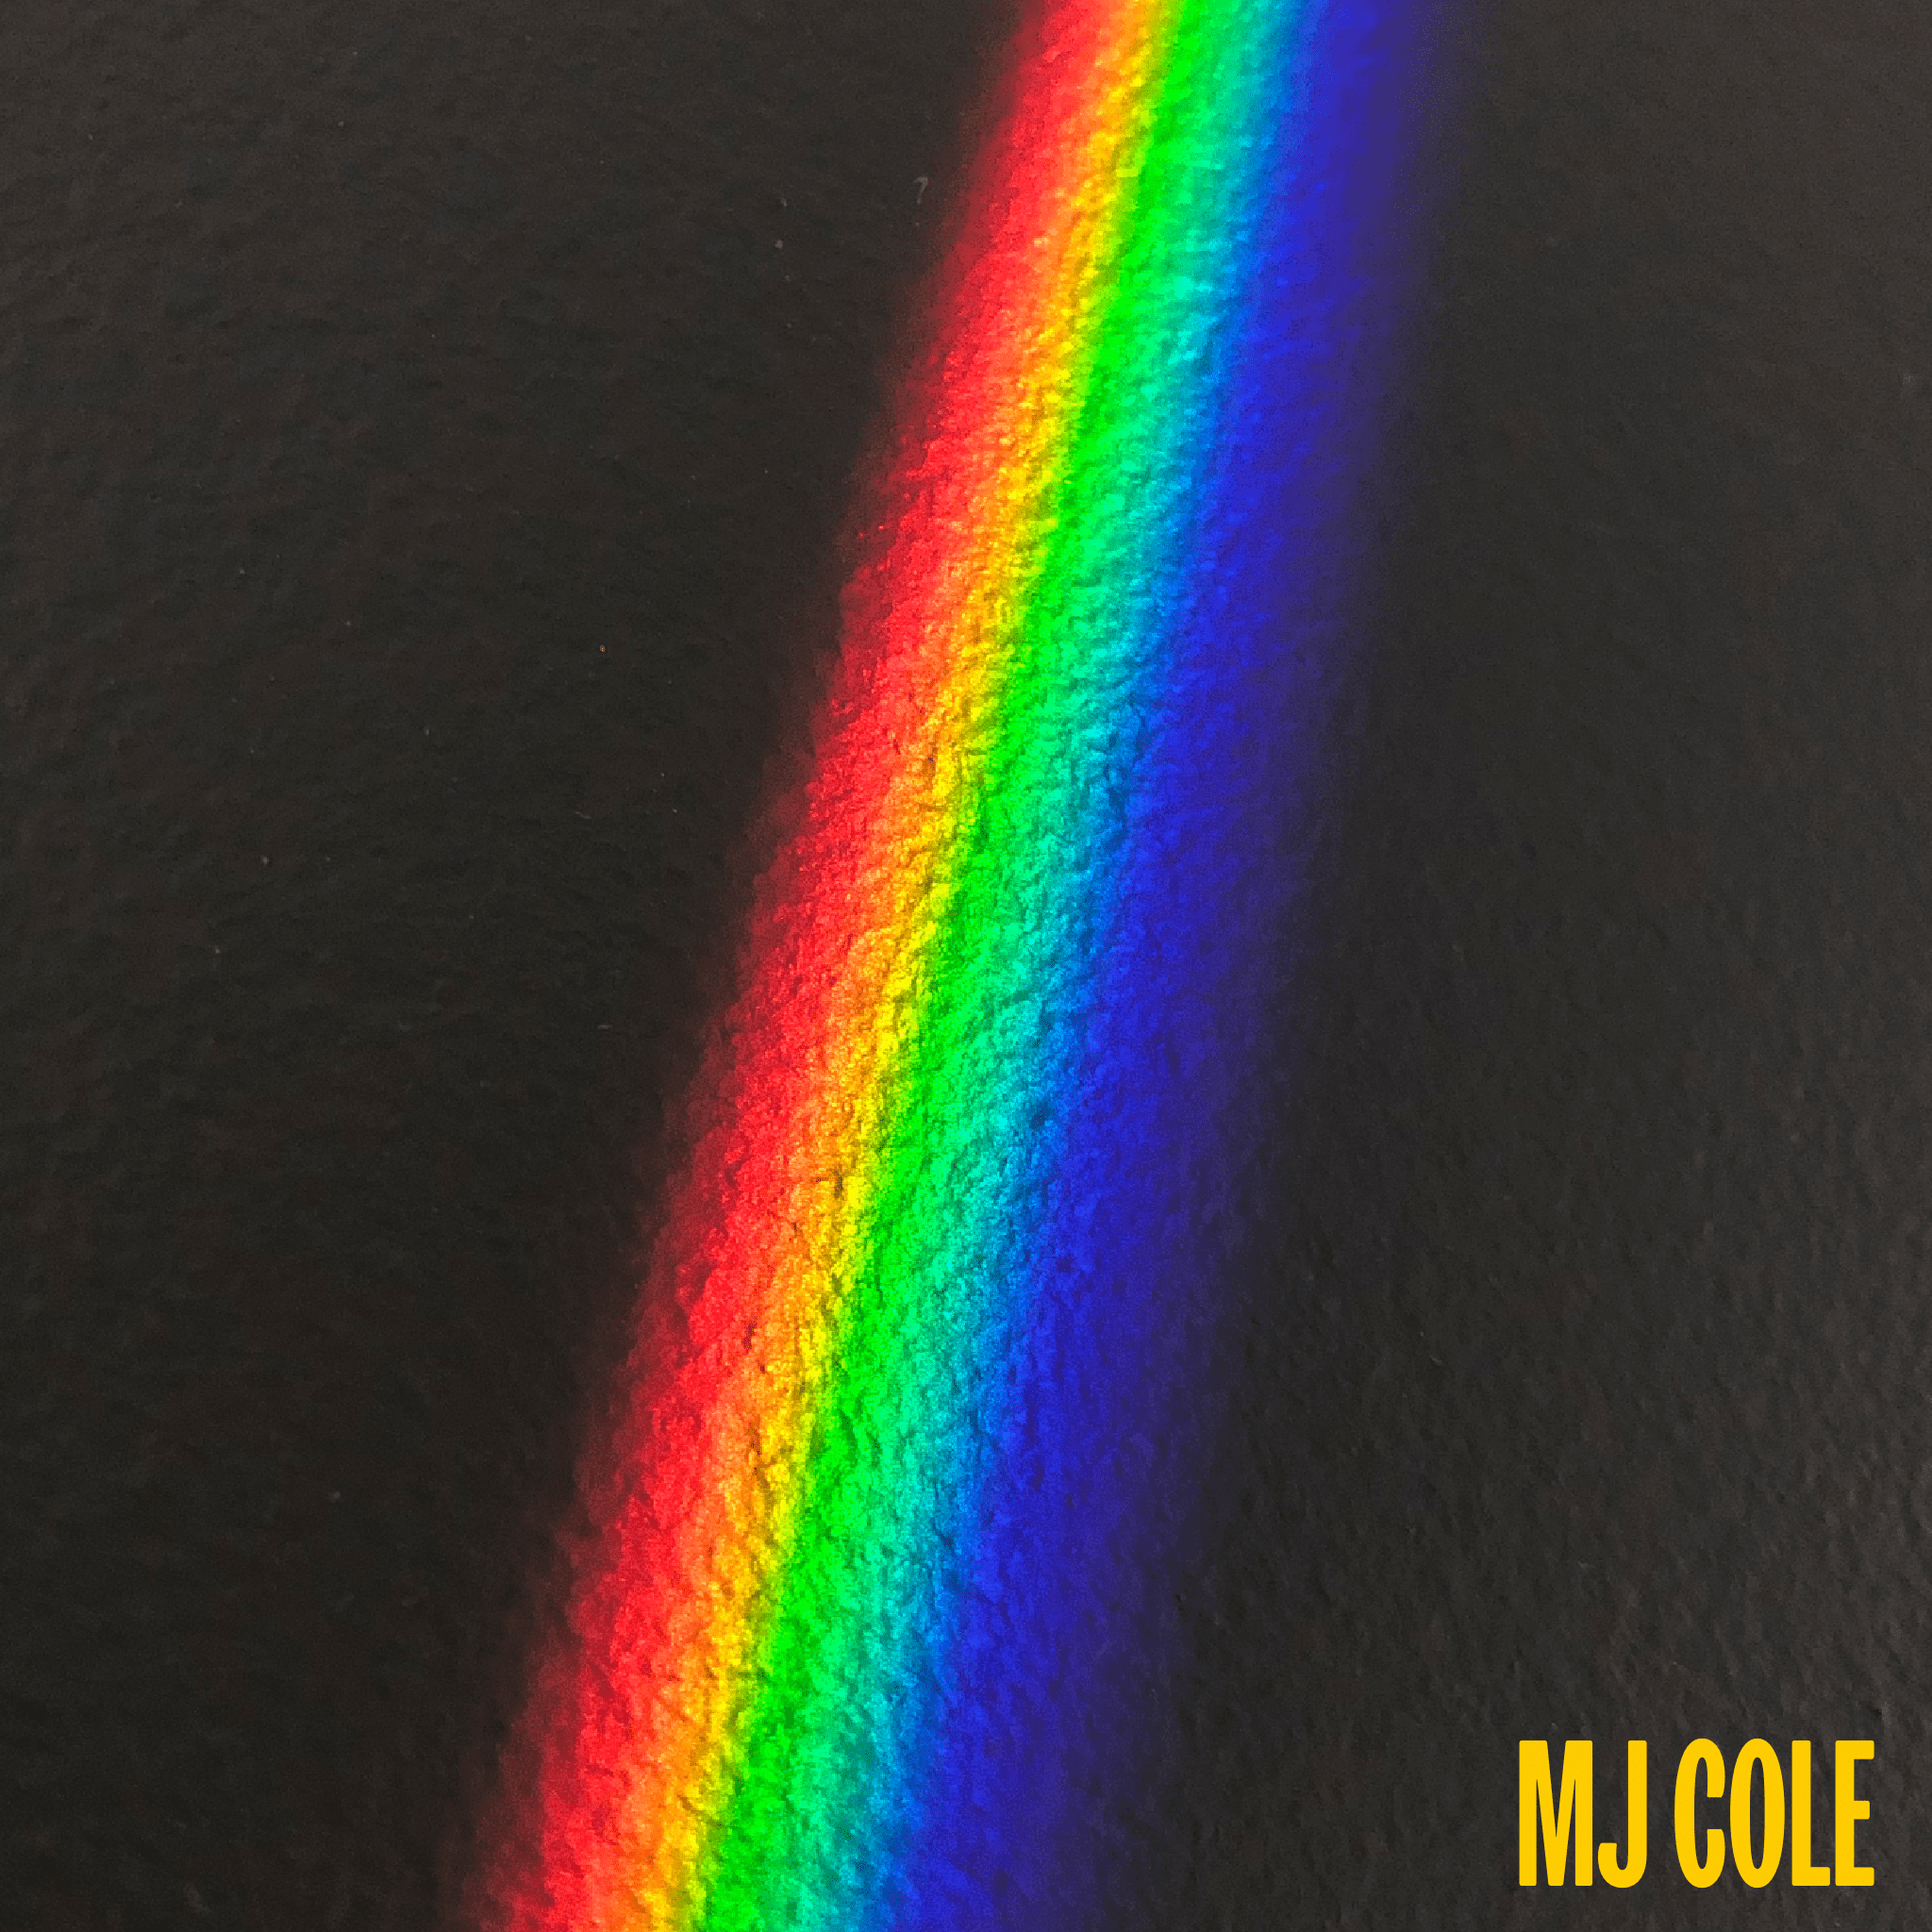 Cover art for MJ Cole's song: Lay it all on the Line